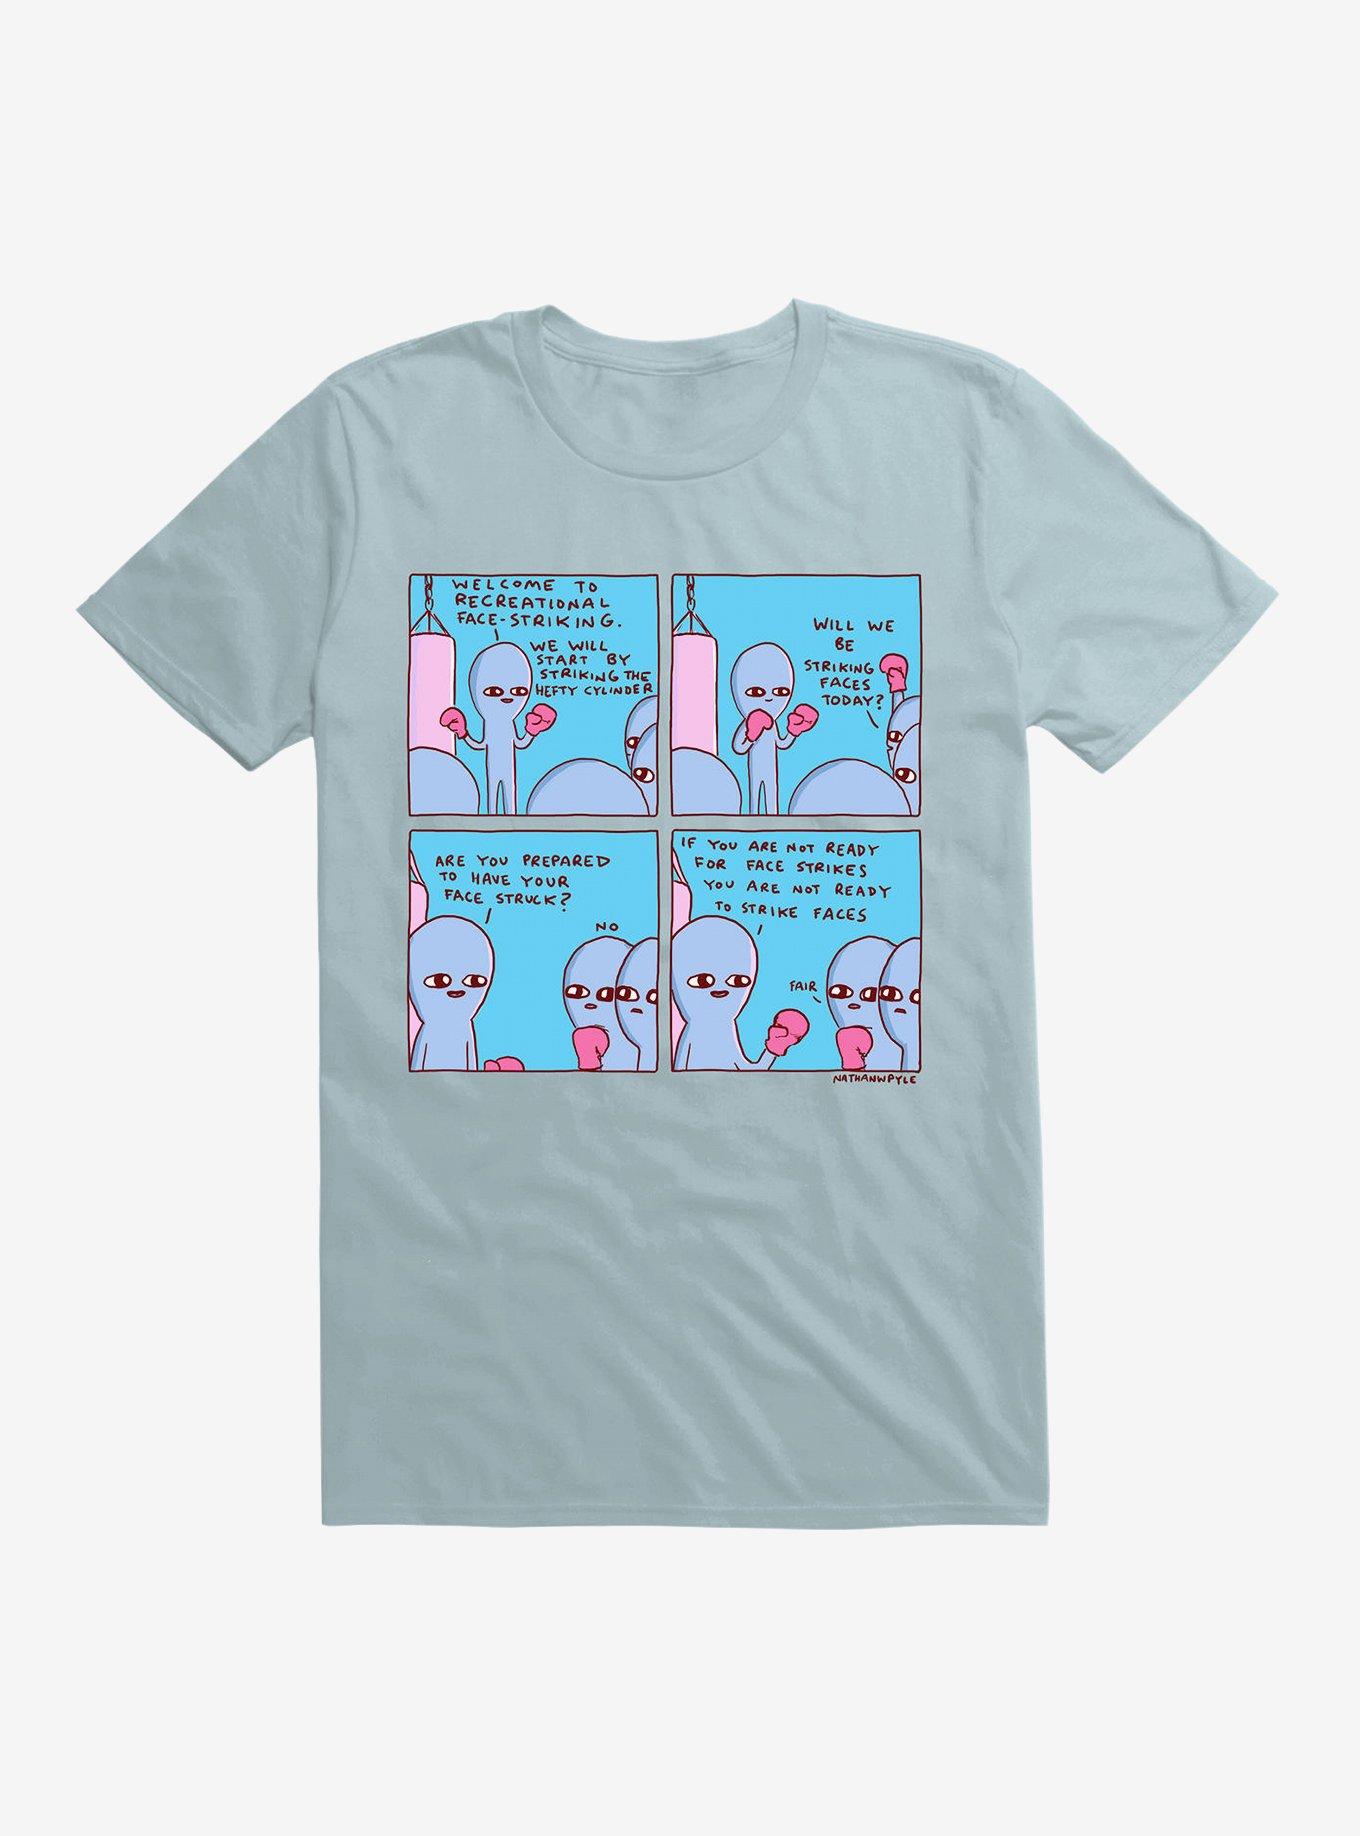 Strange Planet Will We Be Striking Faces Today? T-Shirt, LIGHT BLUE, hi-res